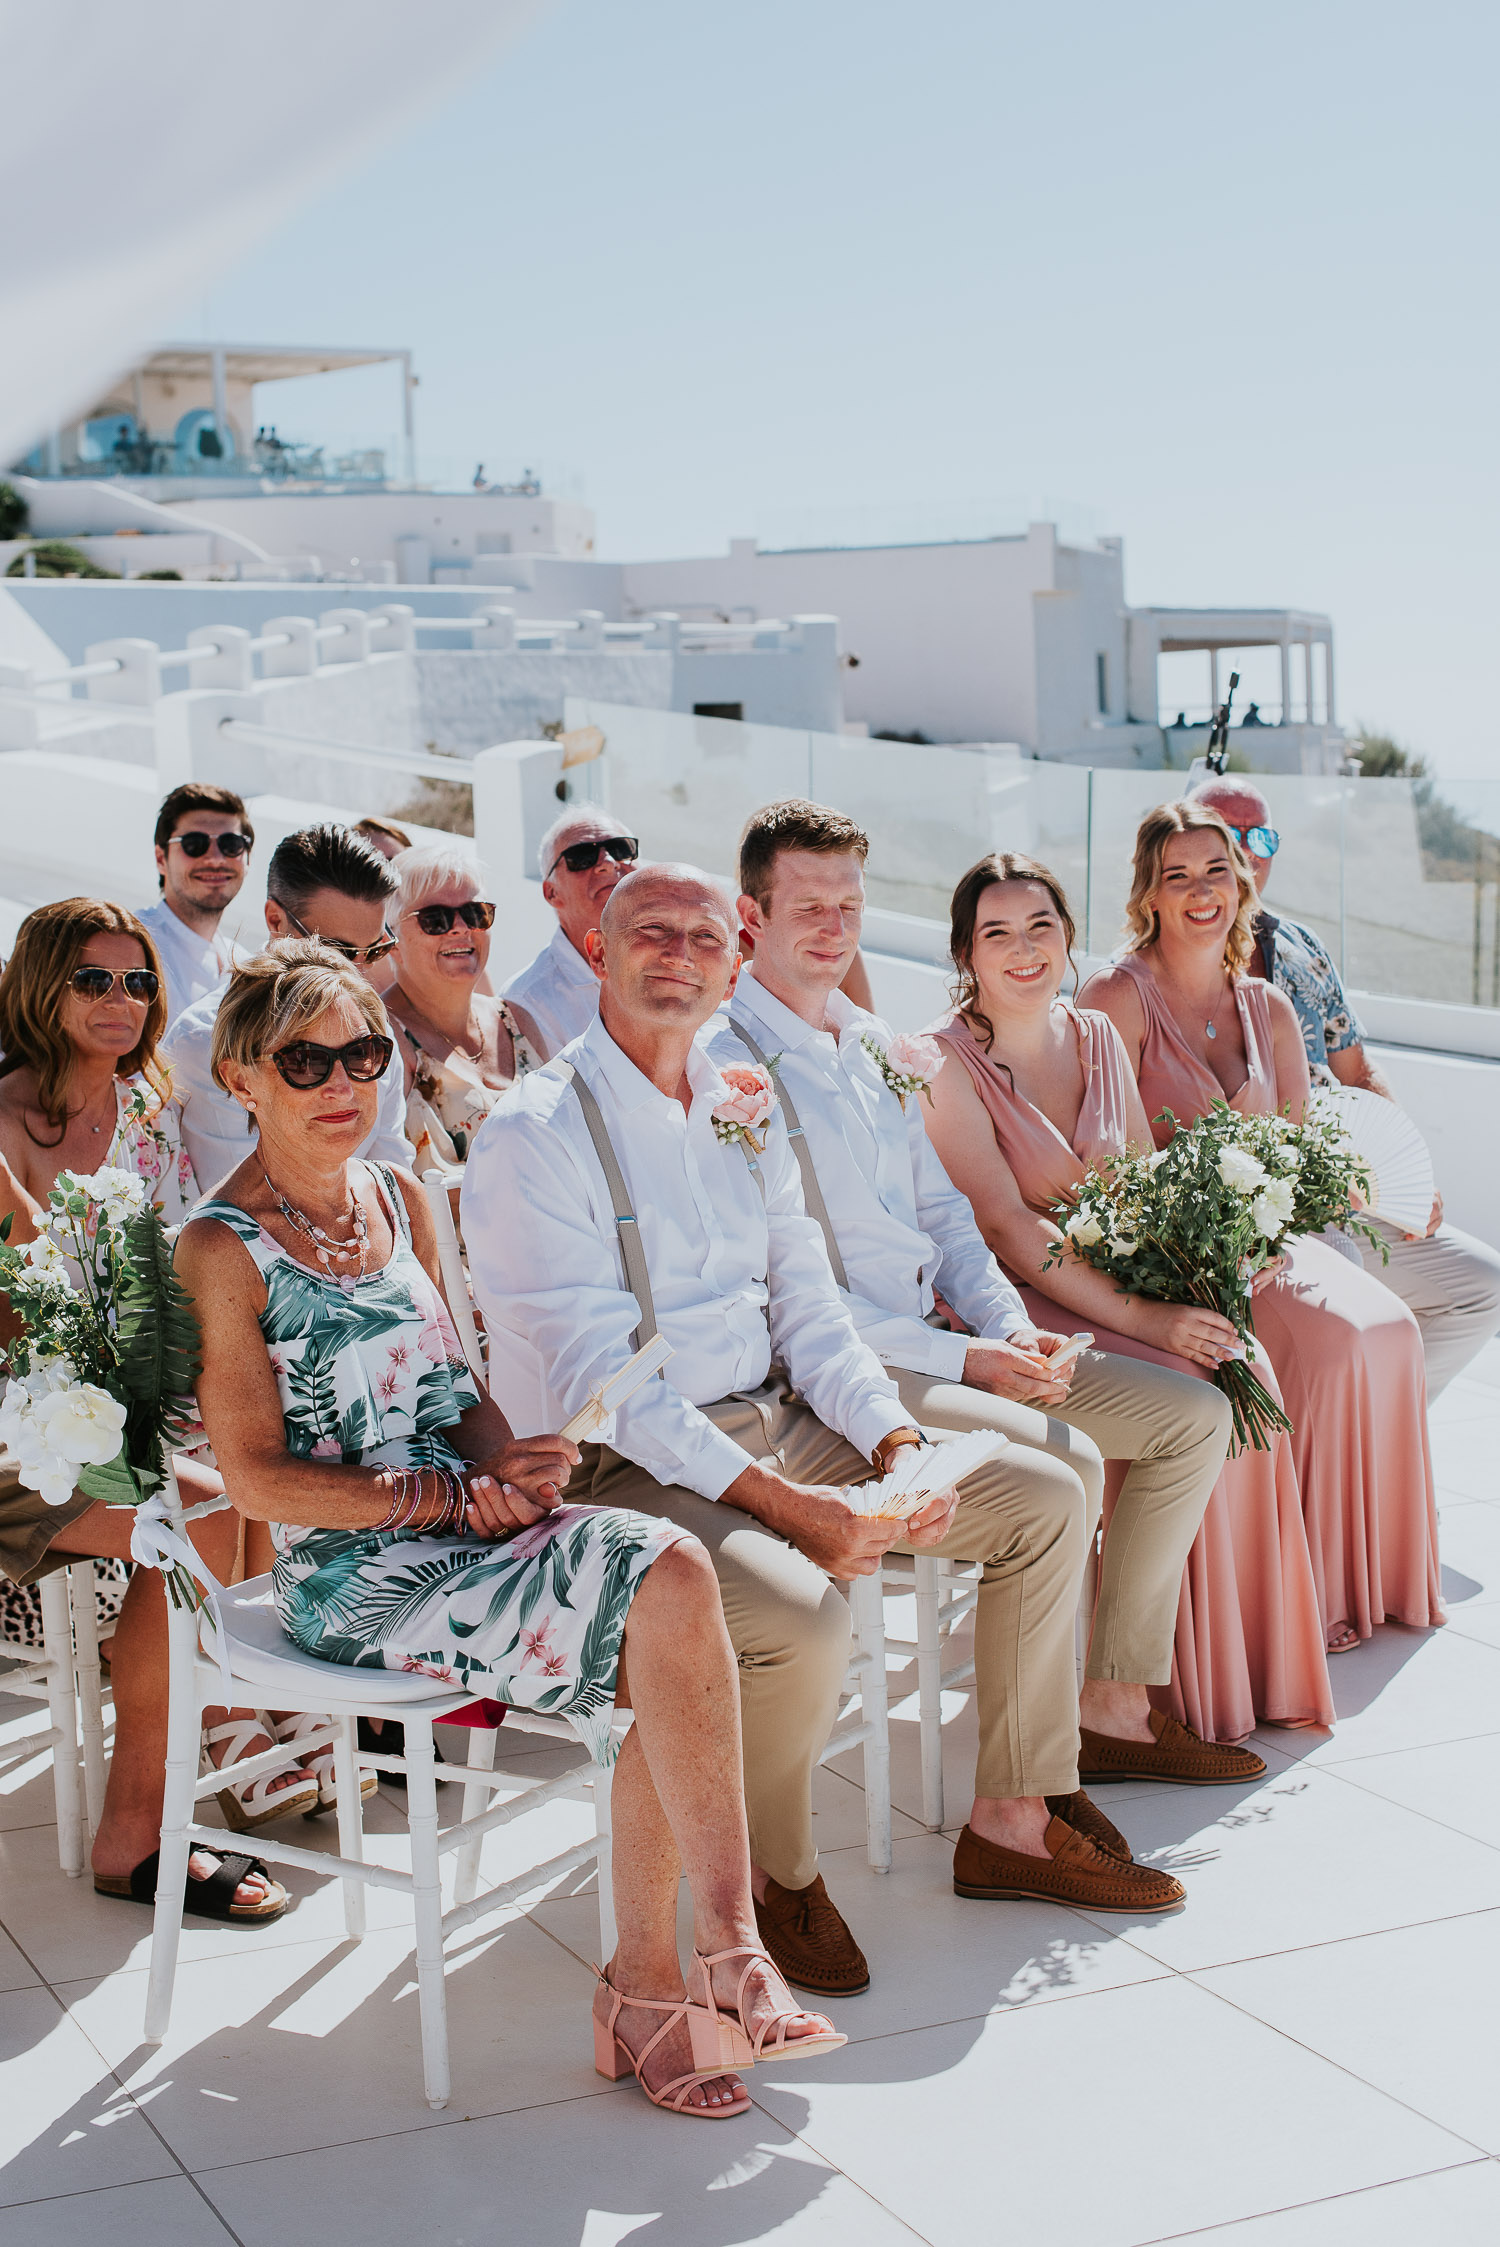 Wedding photographer Santorini: guests sat on the ceremony terrace with bridesmaids smiling in the sunshine by Ben and Vesna.